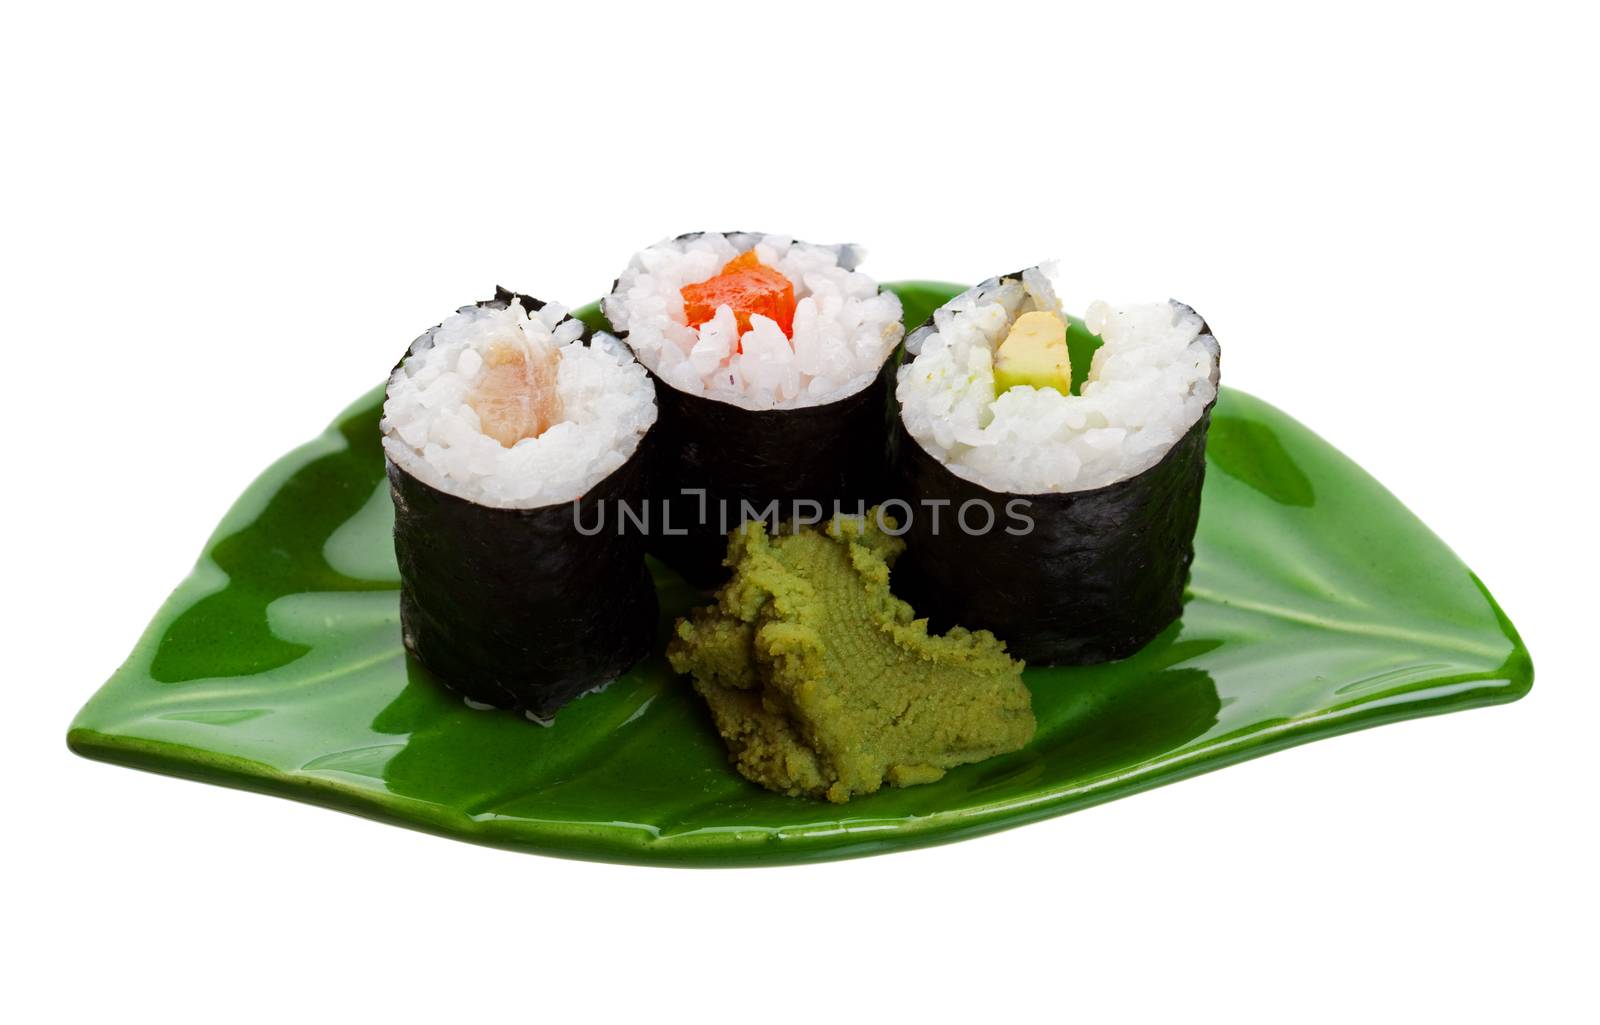 Three kinds of sushi on a leaf shaped plate.  Shot on white background.